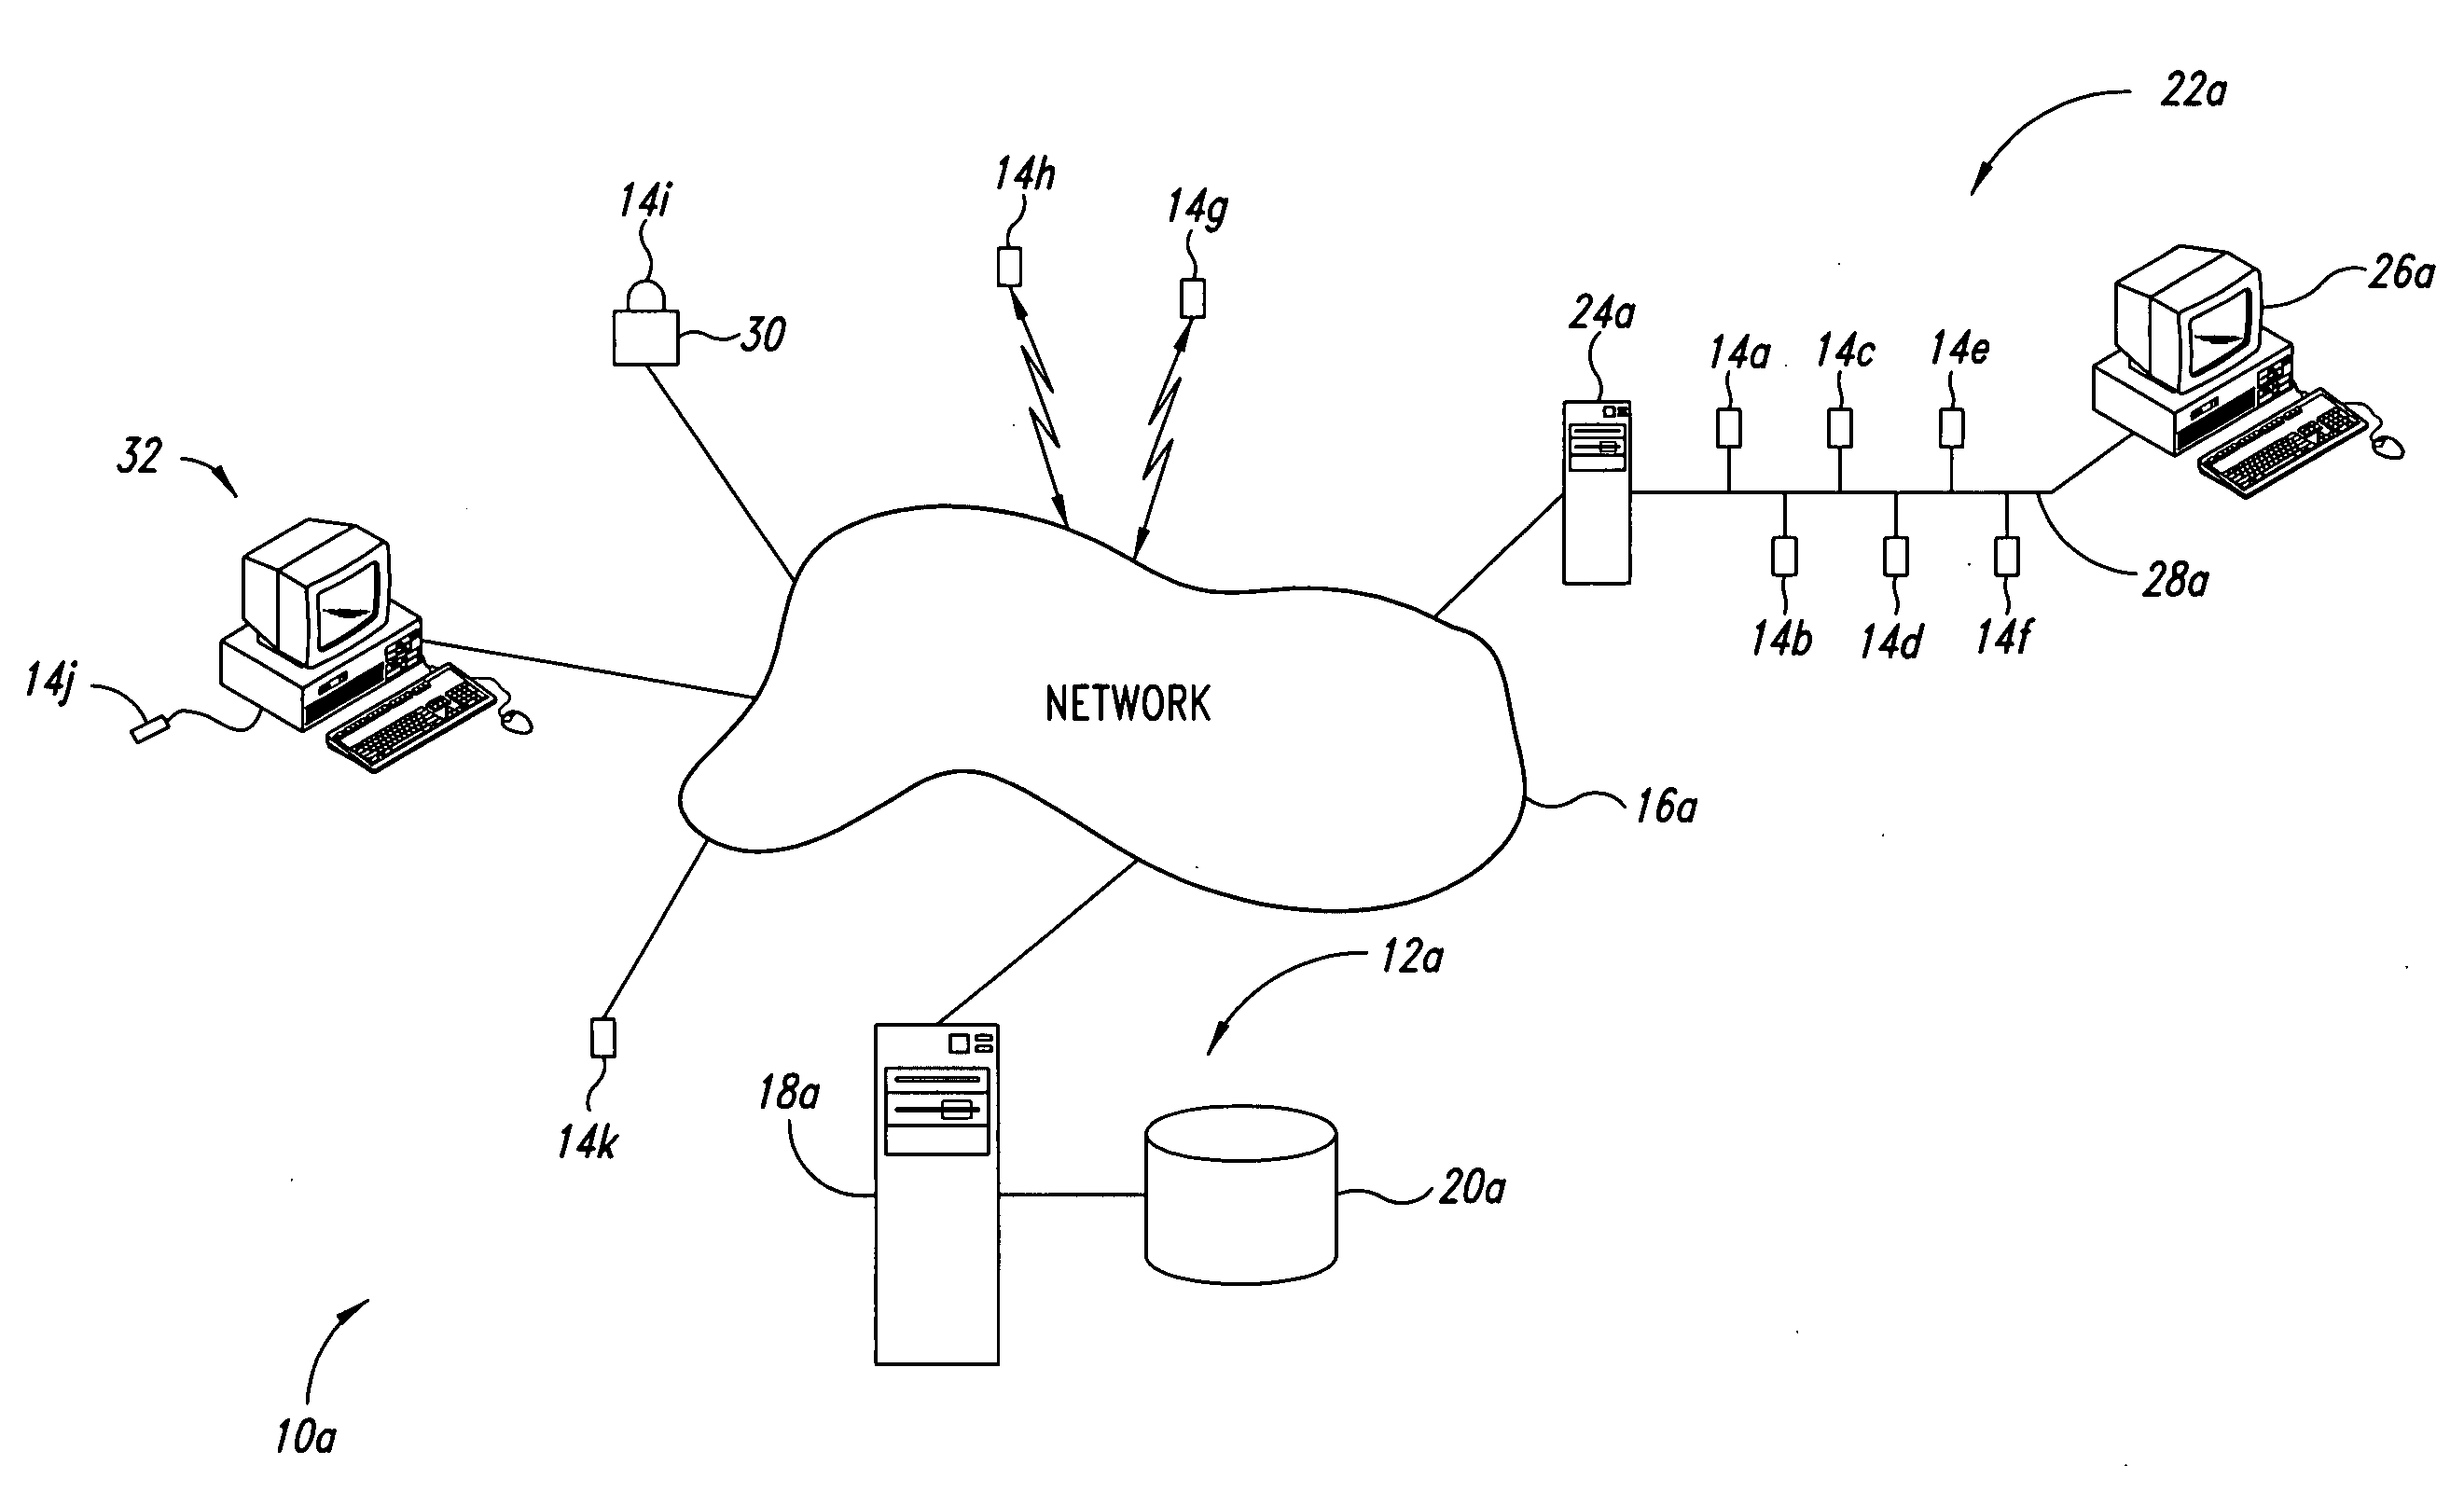 Method, apparatus, and article to facilitate evaluation of objects using electromagnetic energy